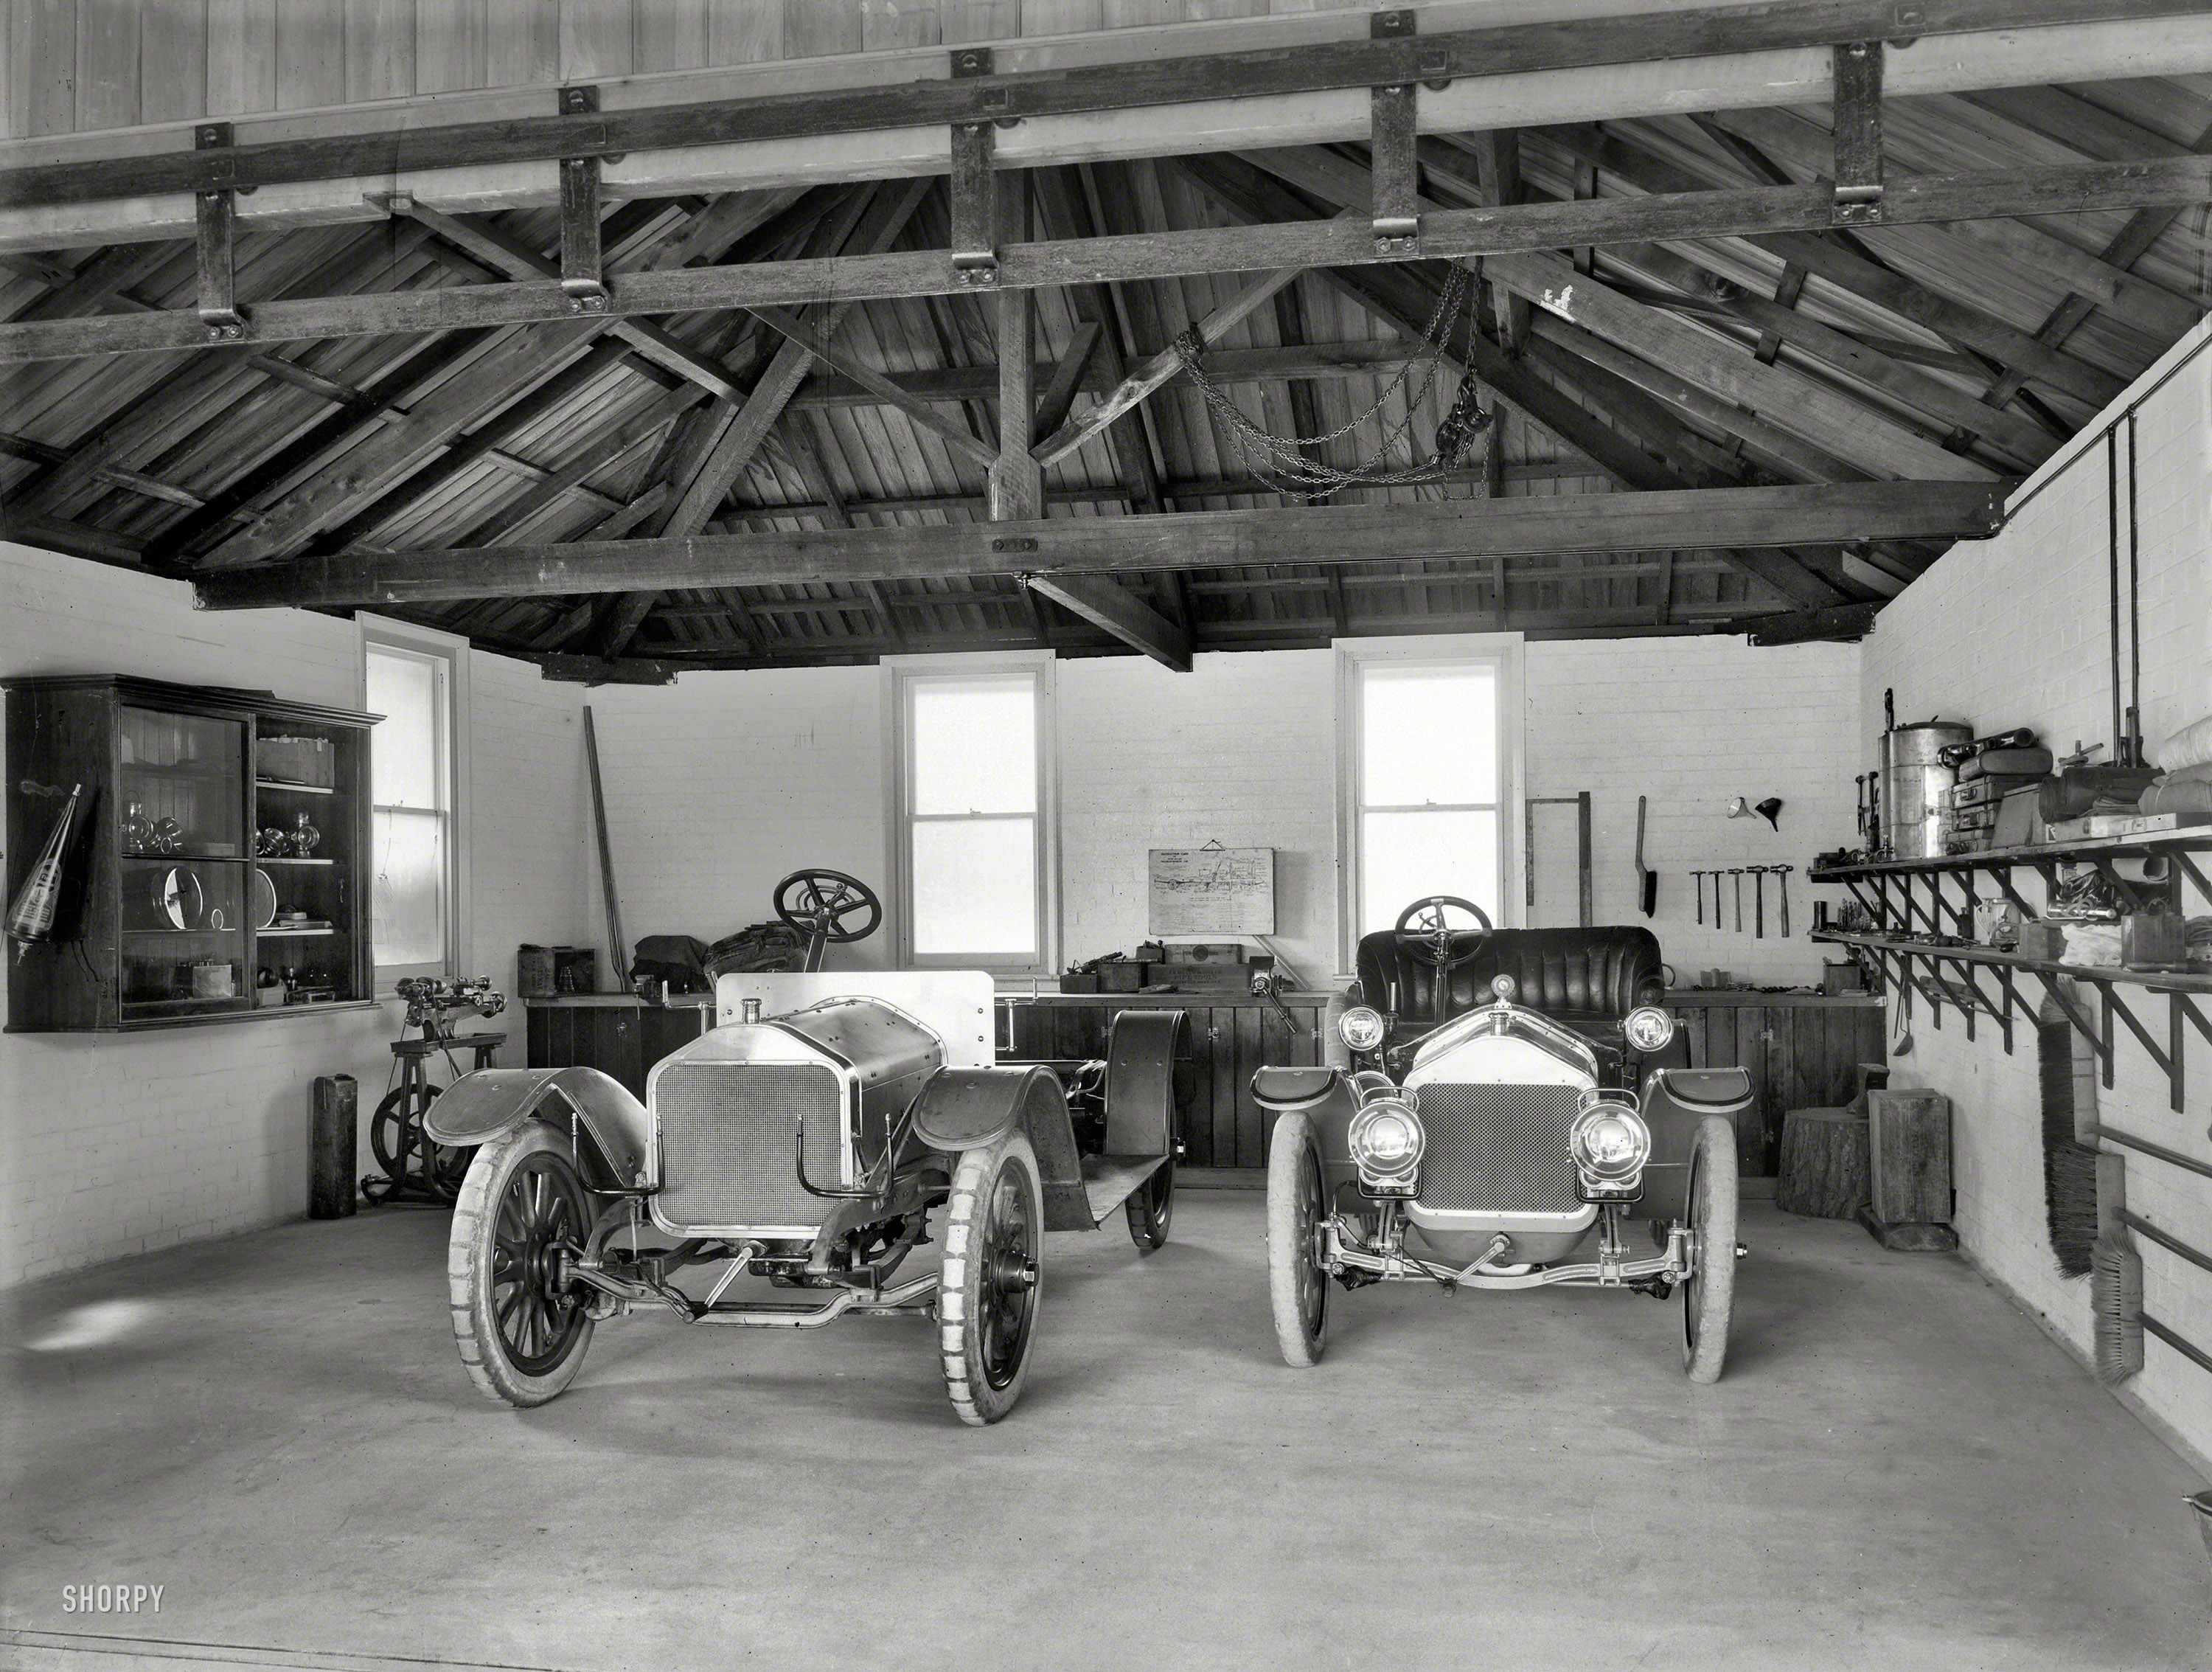 Christchurch, New Zealand, circa 1908. "Wolseley and Cadillac motor cars in garage." Glass plate by the Steffano Webb Photographic Studio. View full size.